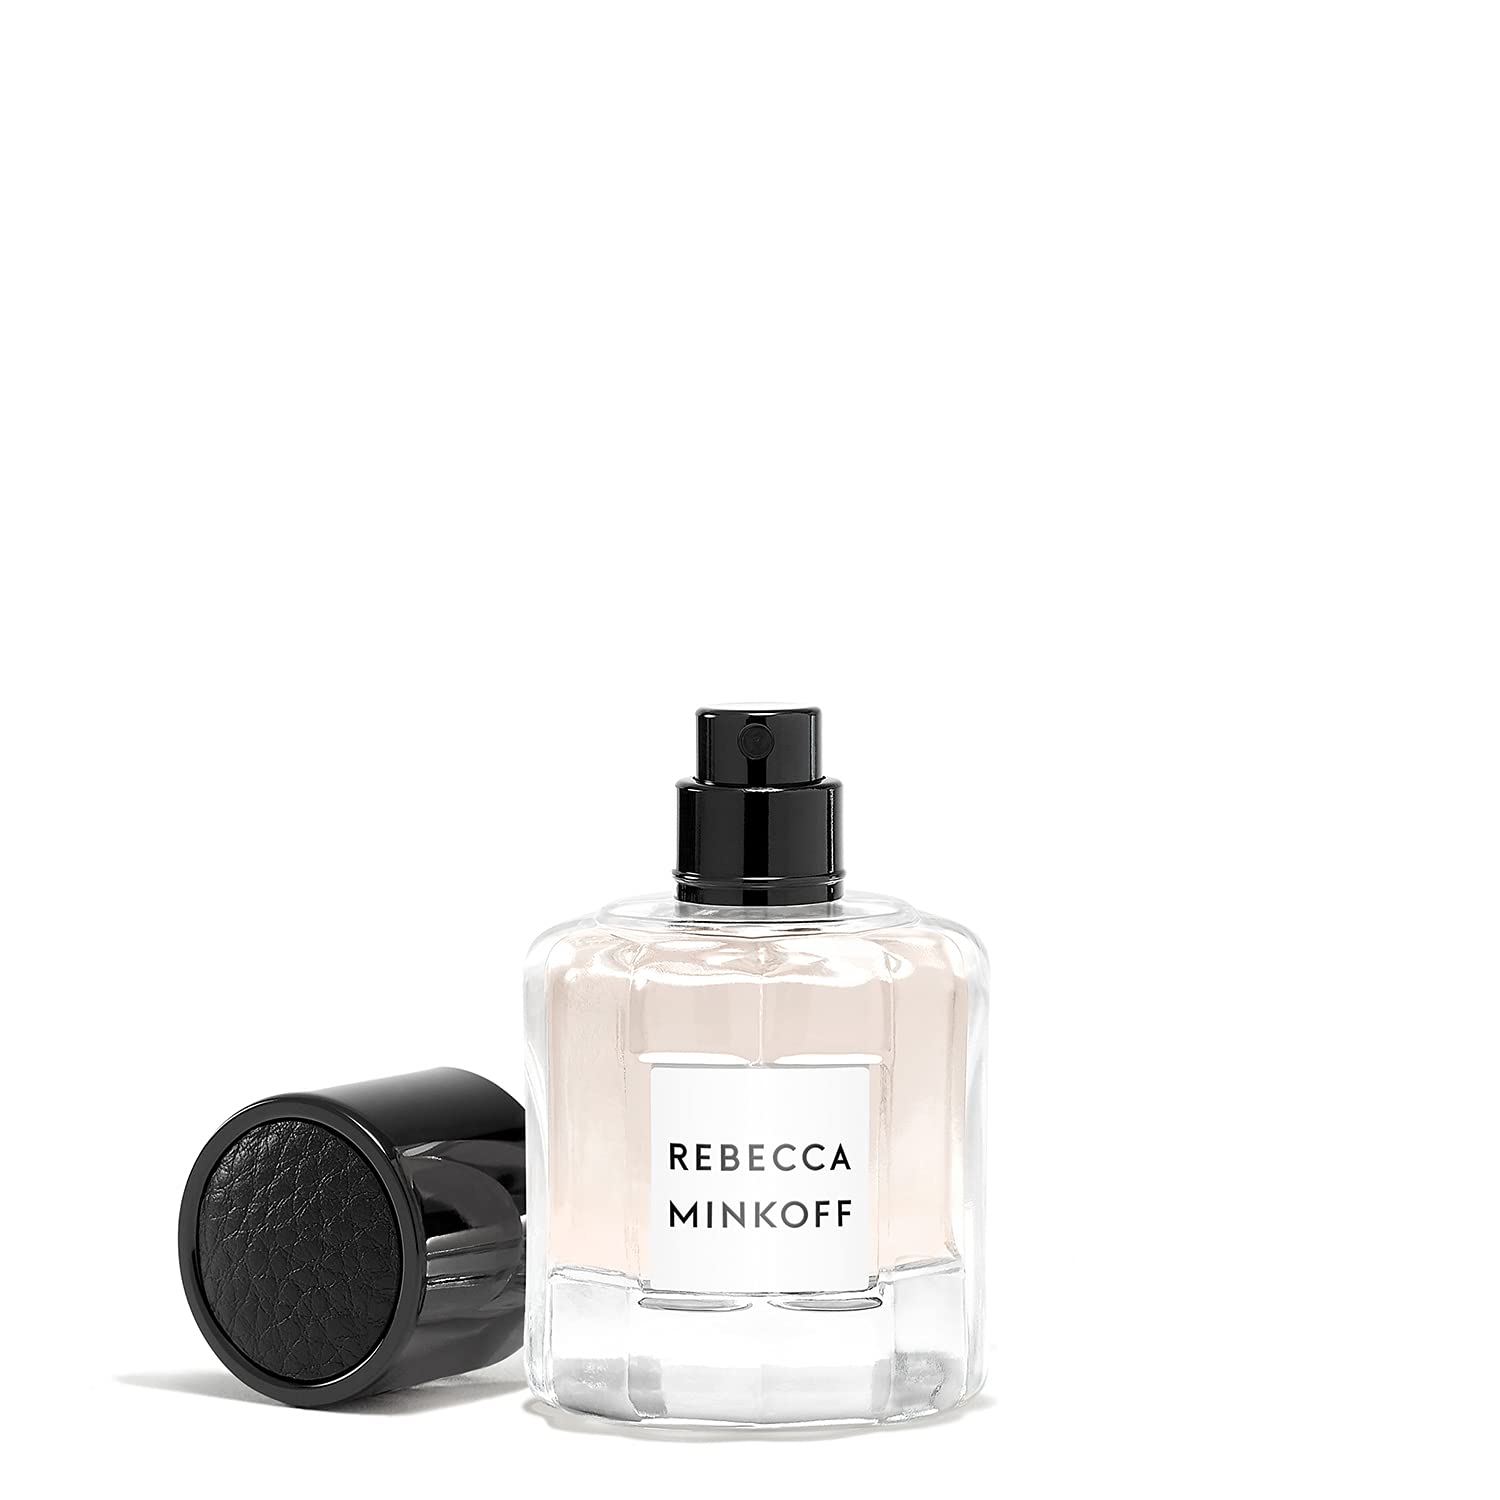 Rebecca Minkoff Eau De Parfum Feminine Accents of Jasmine and Coriander, Radiate Sensuality & Warmth With A Magnetic Aura, Gluten, Cruelty and Phosphate Free, Vegan, Gift Set, 3 Count